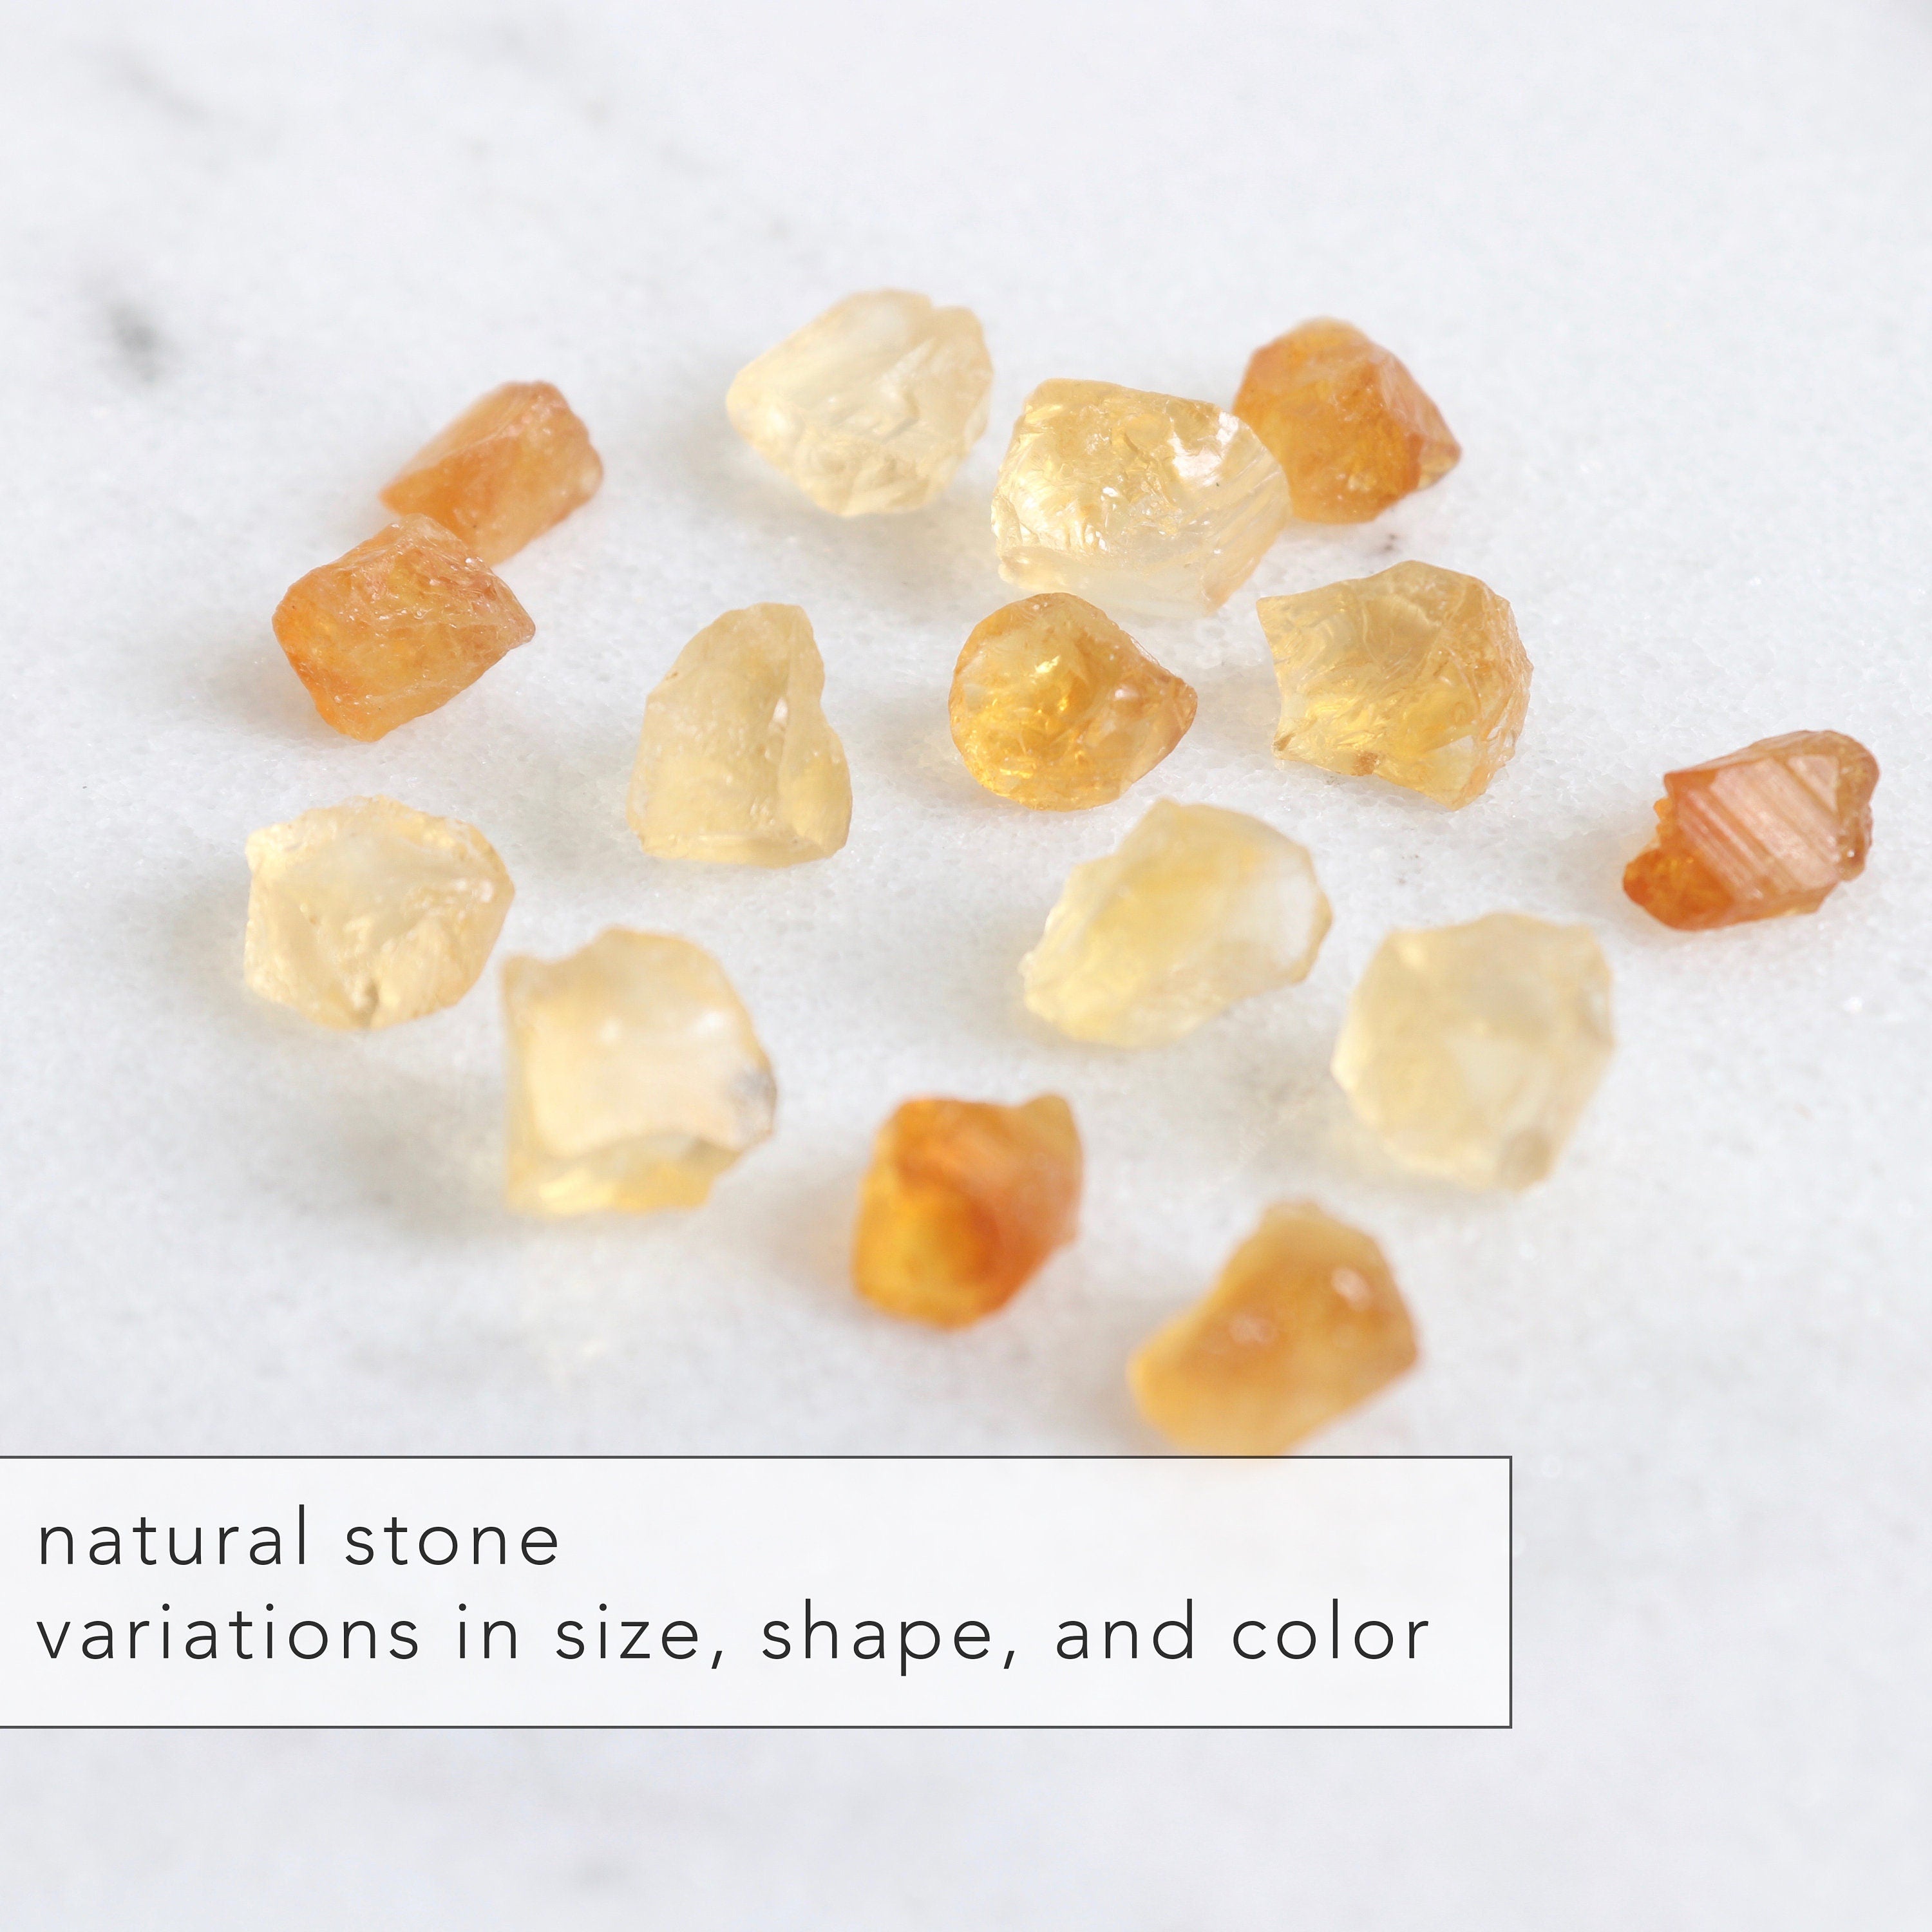 citrine raw crystal necklace